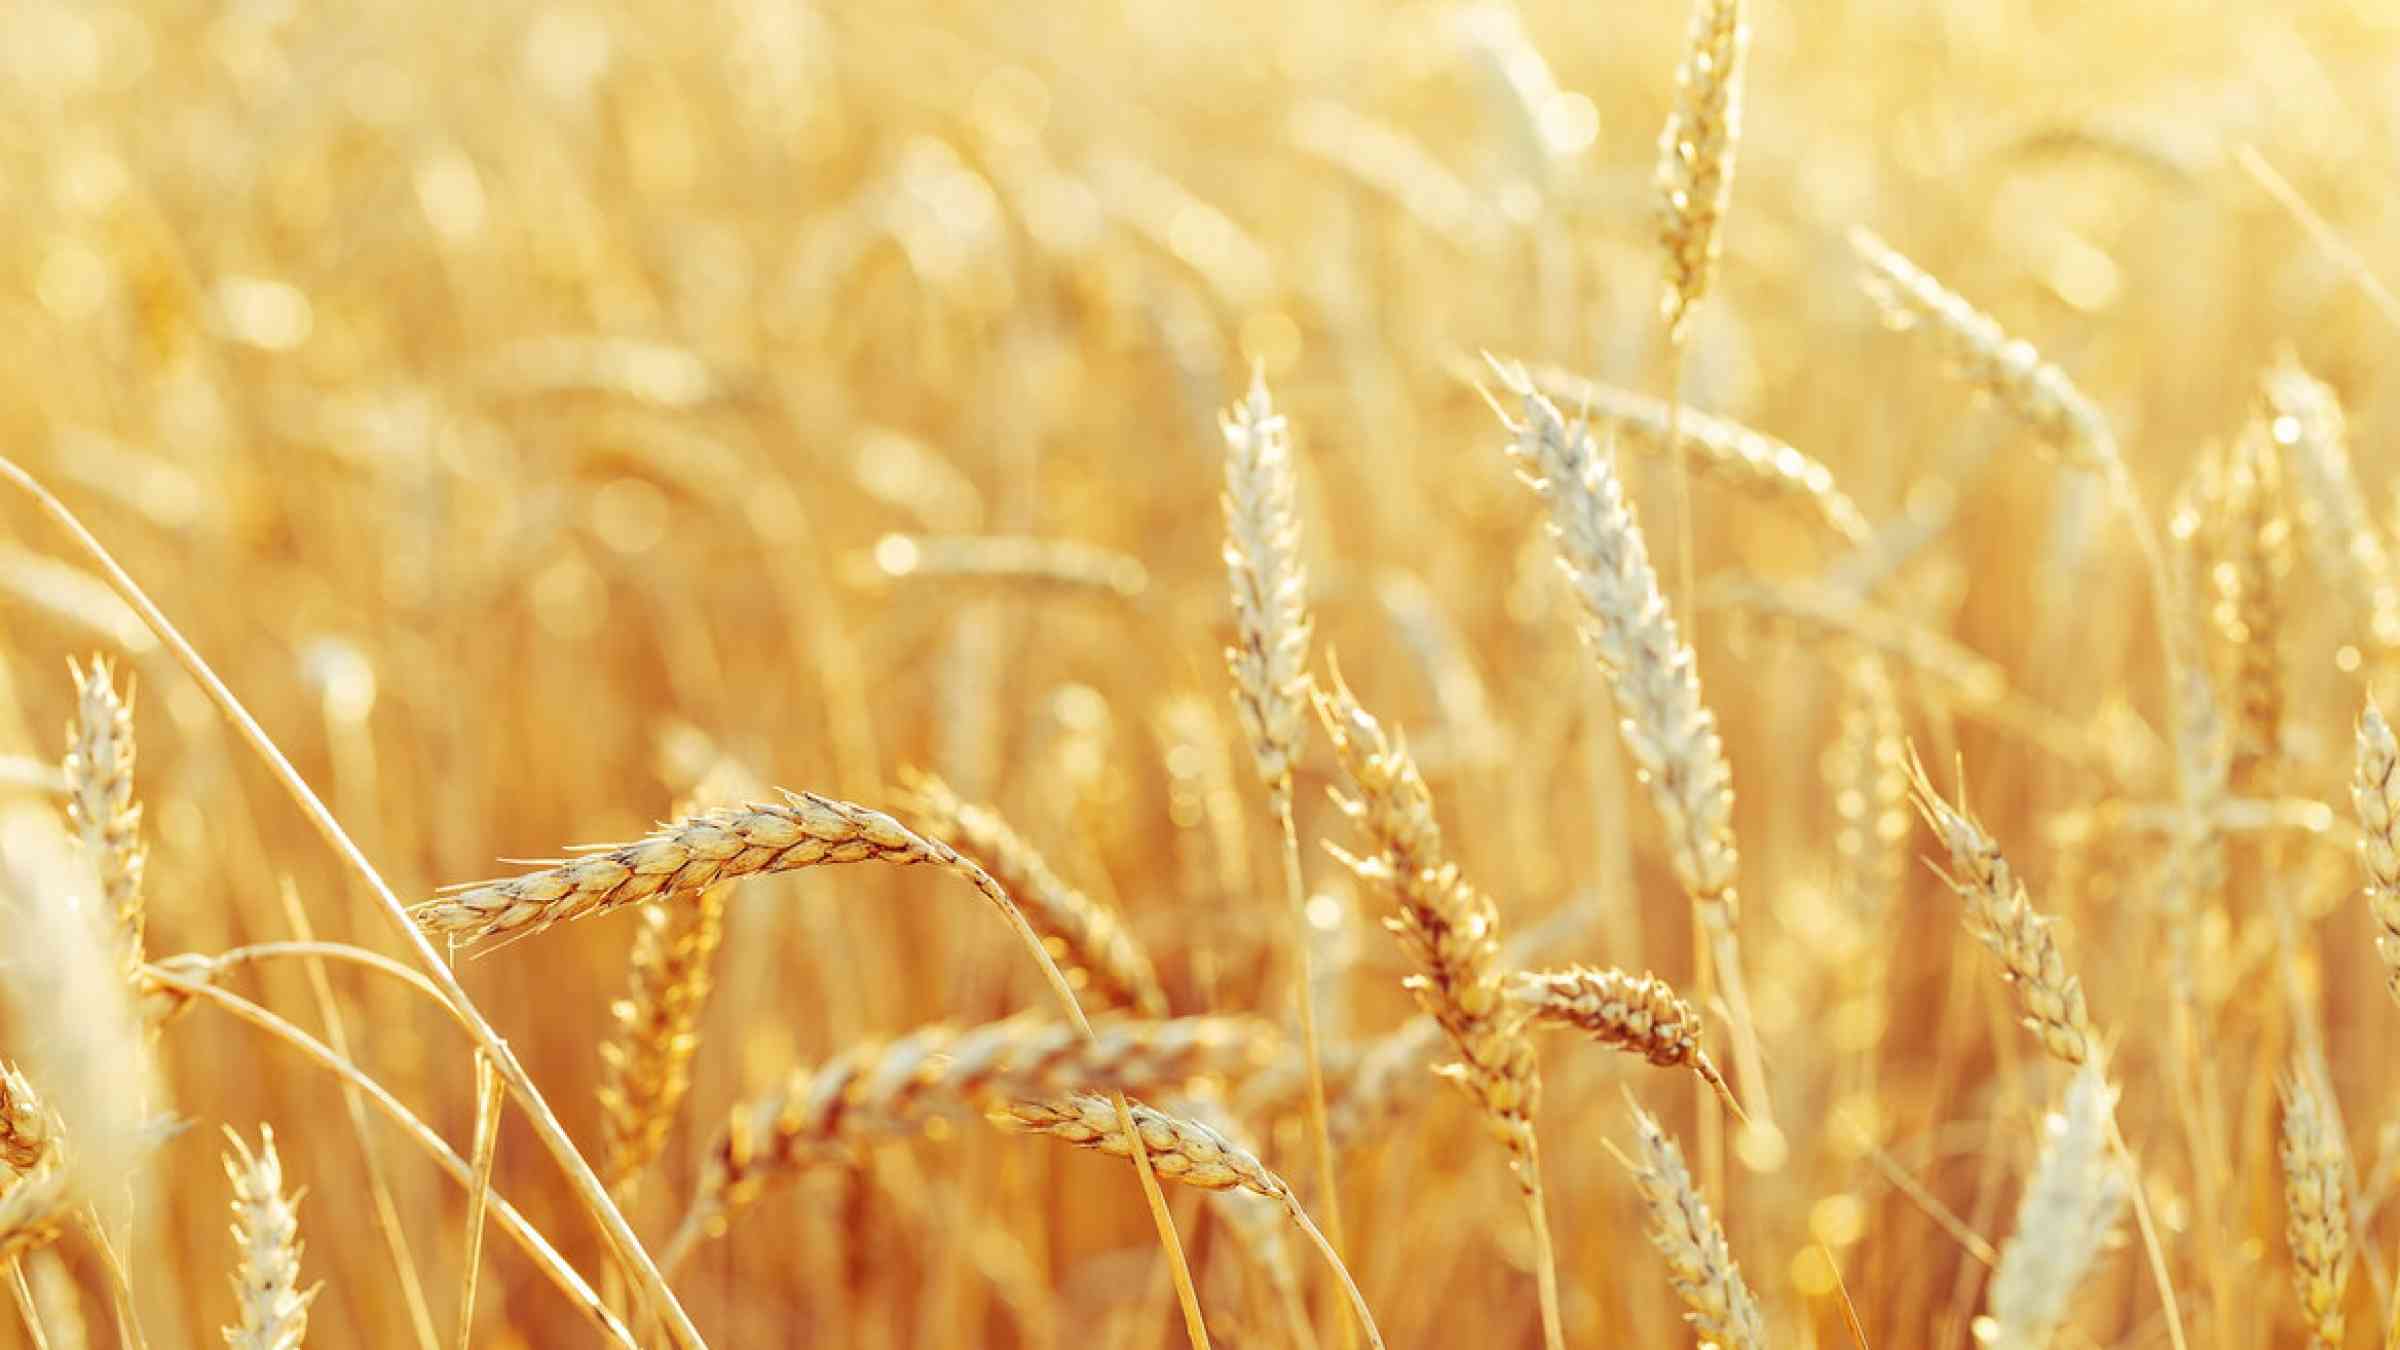 Background of ripening ears of wheat field and sunlight